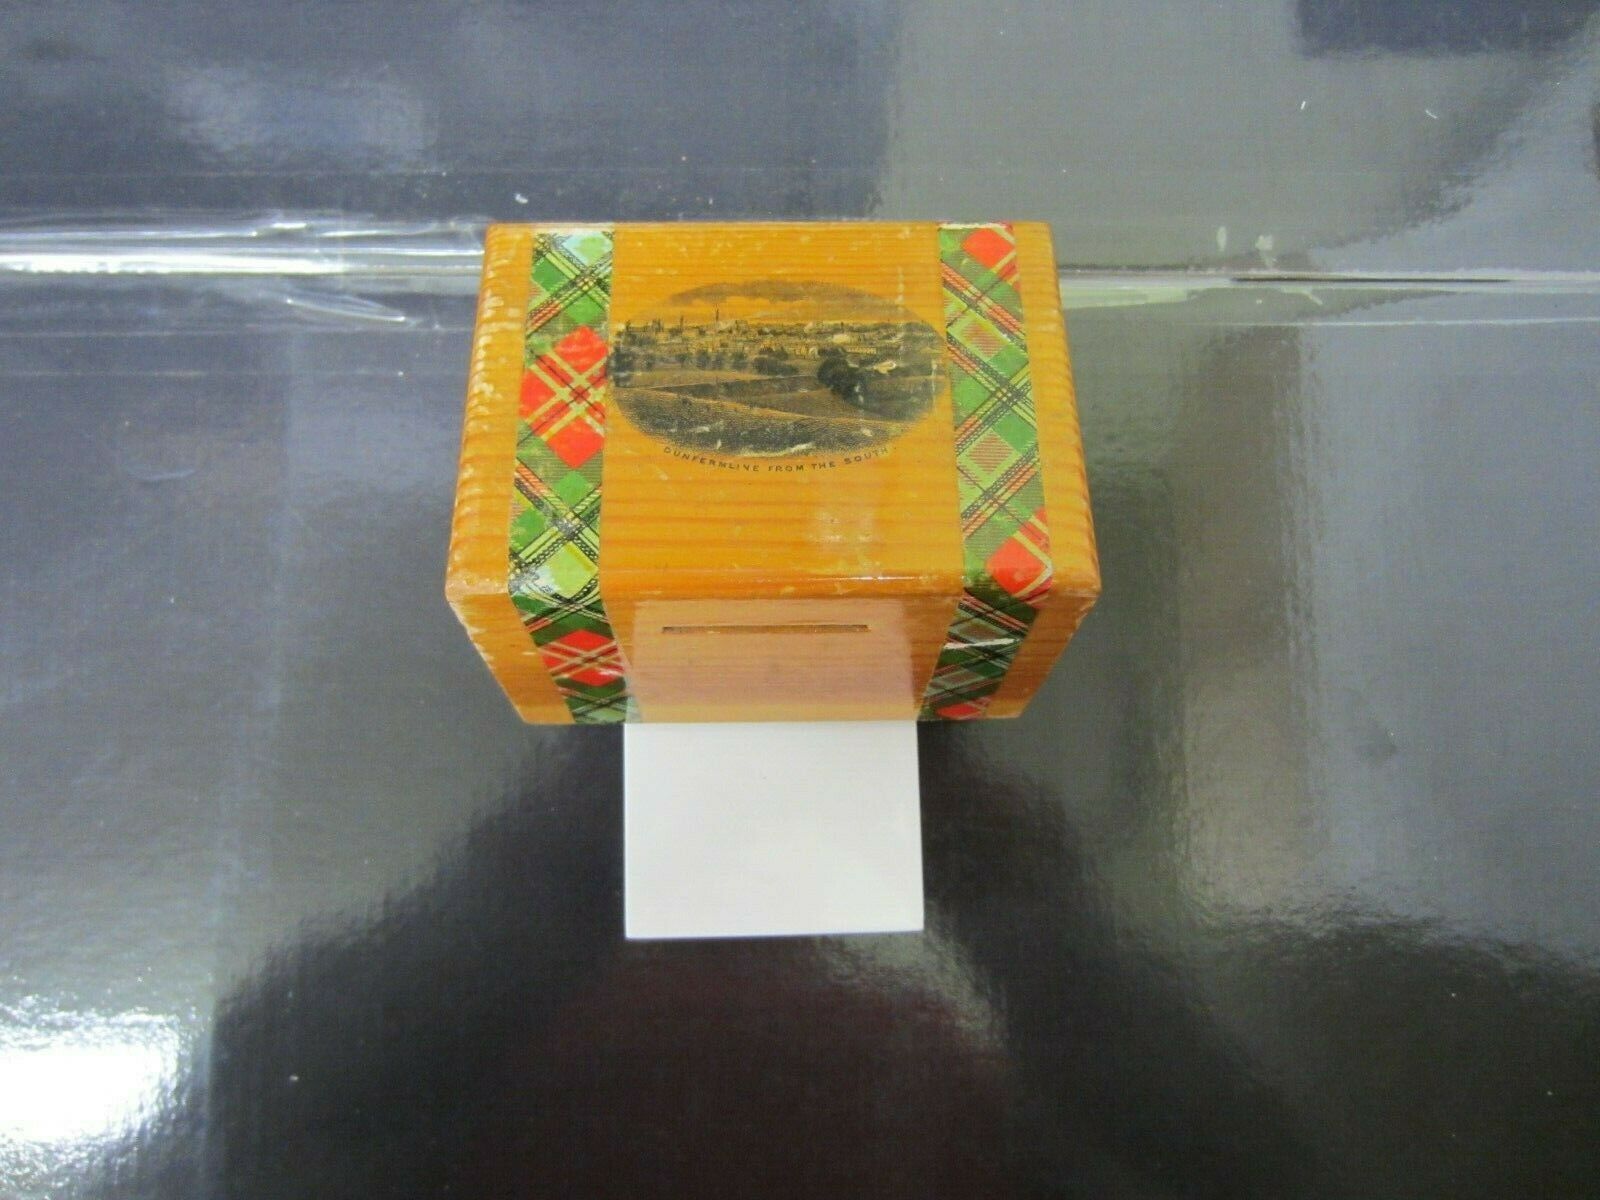 Antique Valuations: Transfer Tartan Ware Money Box with view of Dunfermline Mauchline Ware